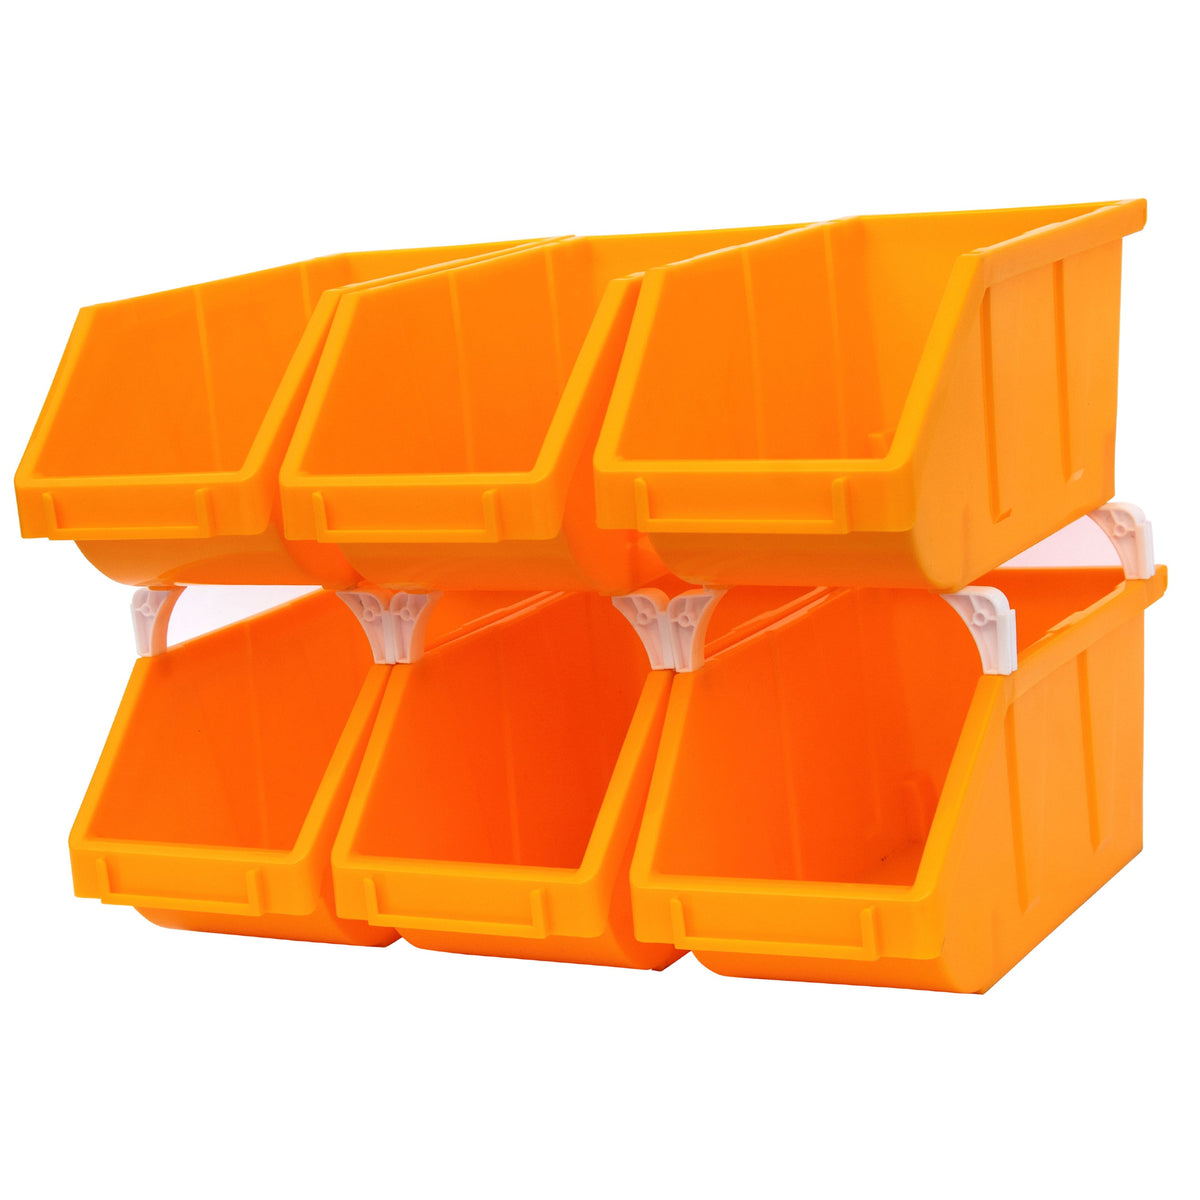 TK Wholesale - Sliding bin frame (not assembled). Our price $49.99. Bins  are not included. Measures 43 l x 16 w x 24 h